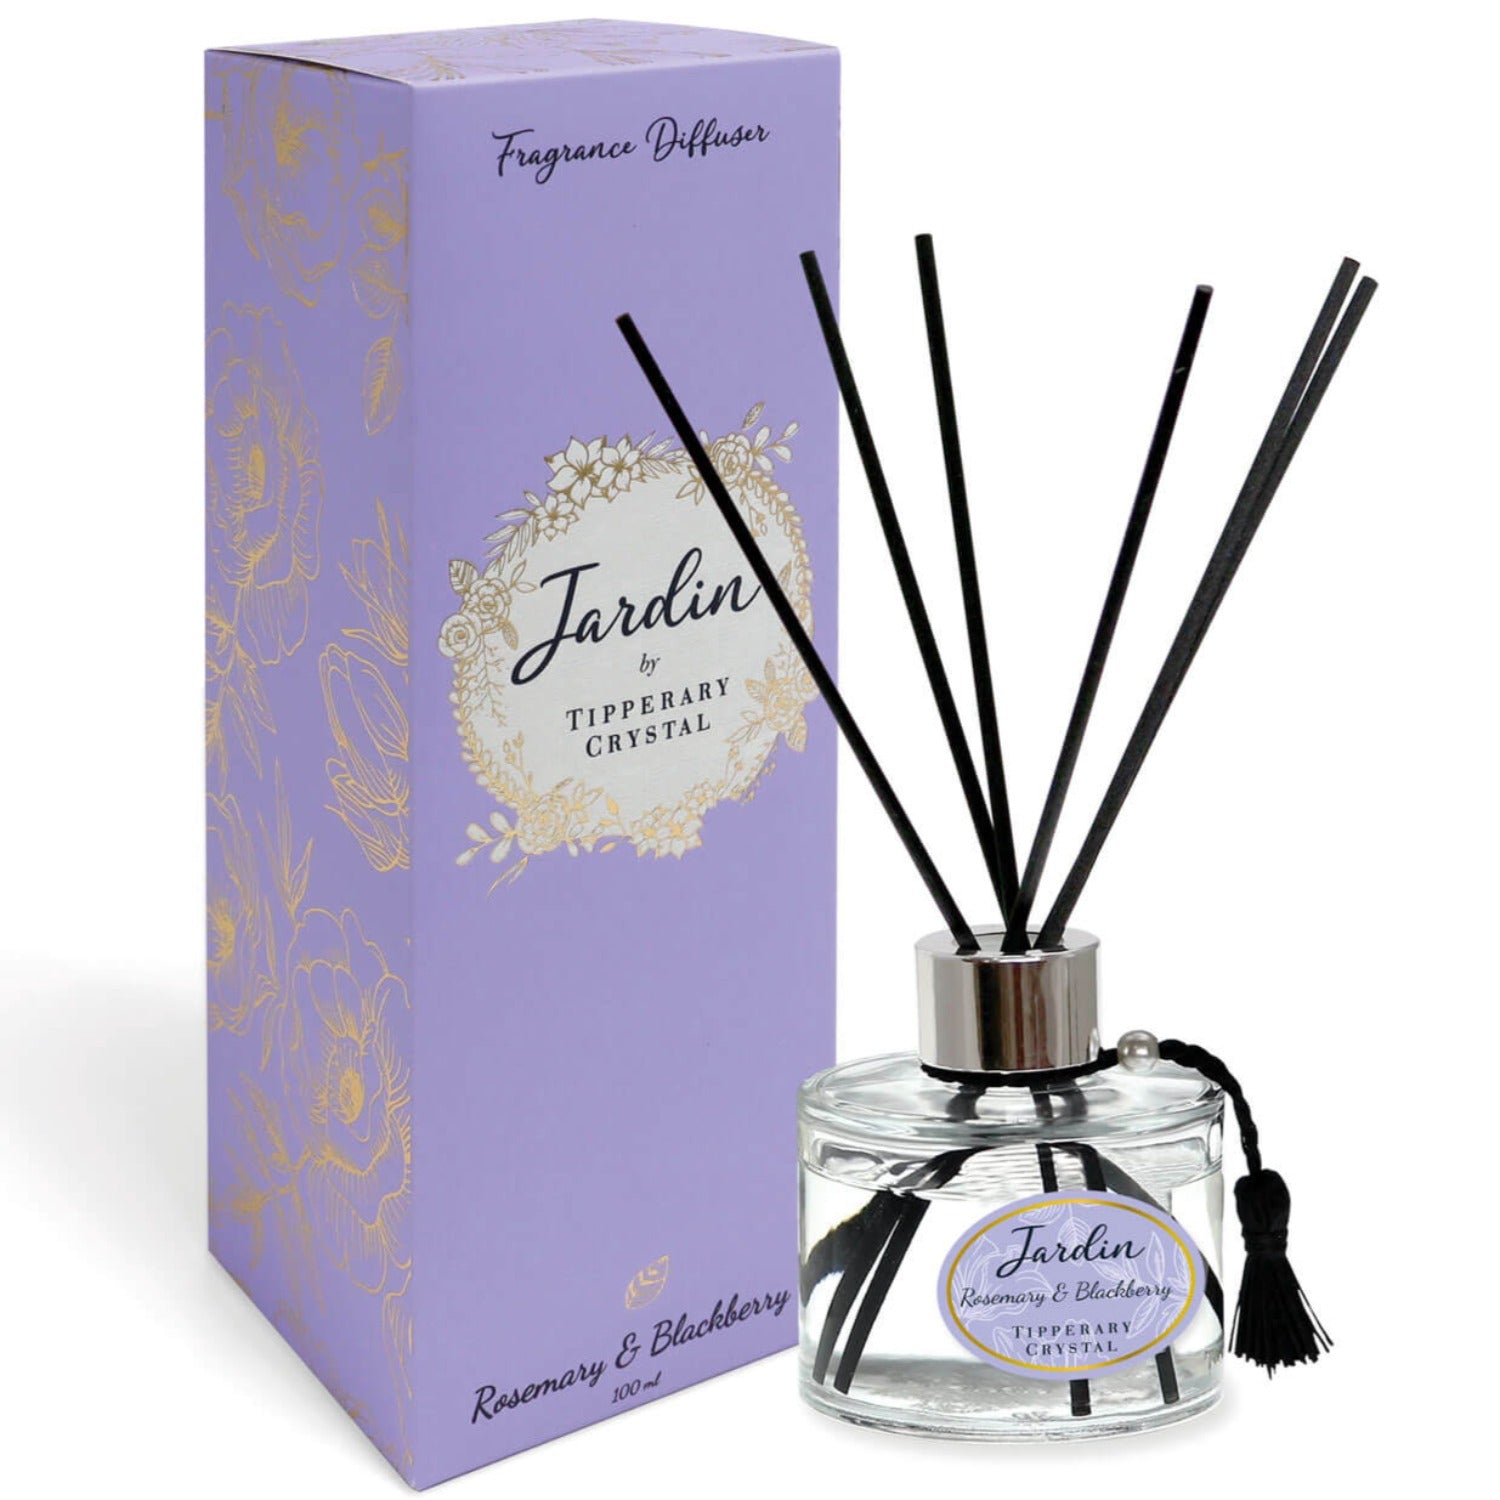 Tipperary Crystal Sandalwood Diffuser 1 Shaws Department Stores